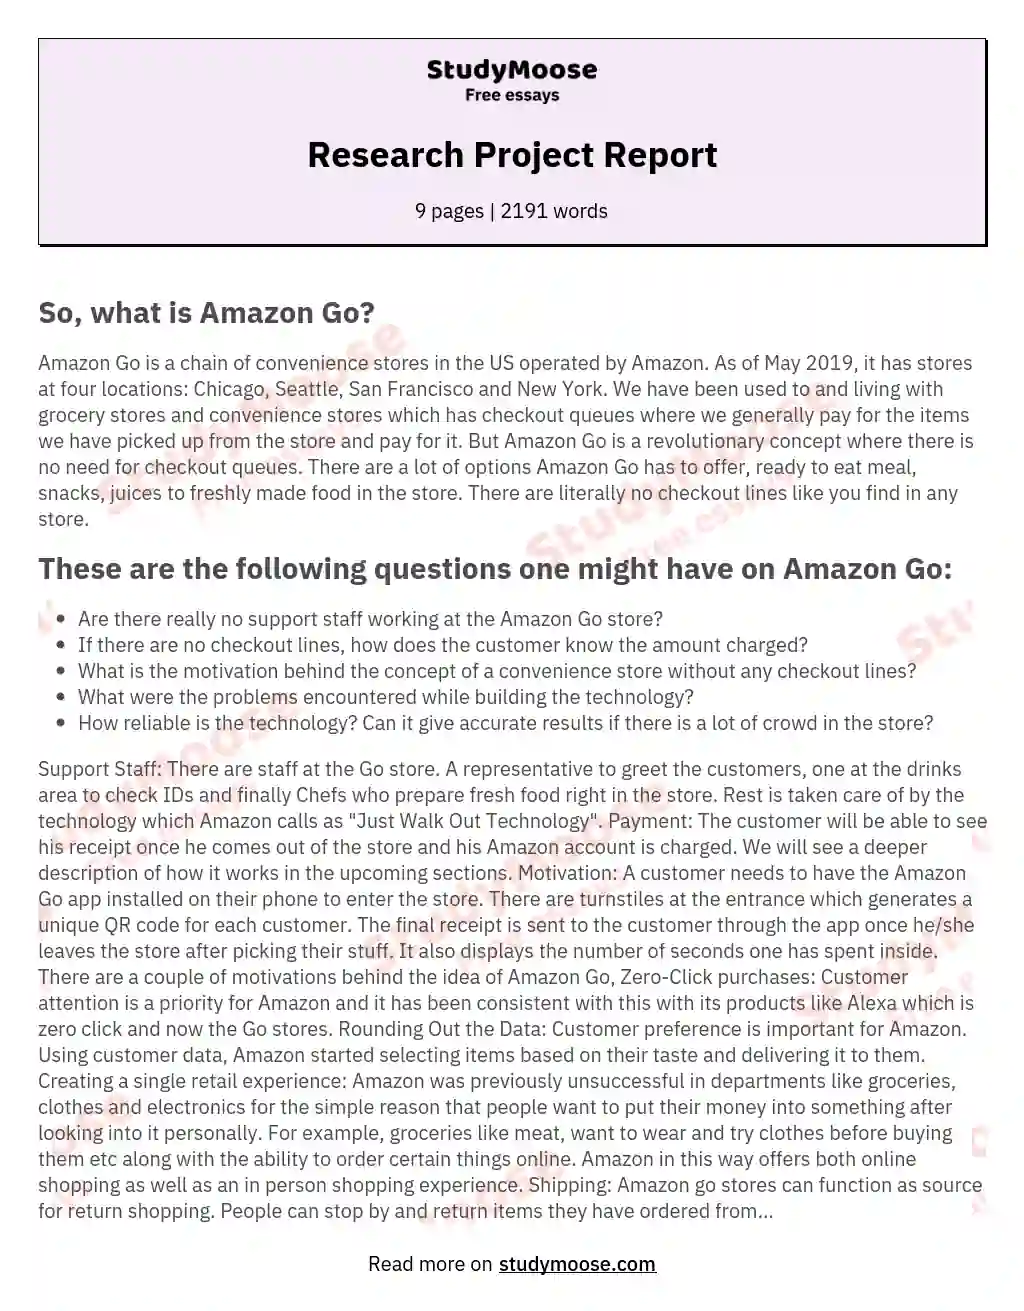 Research Project Report essay